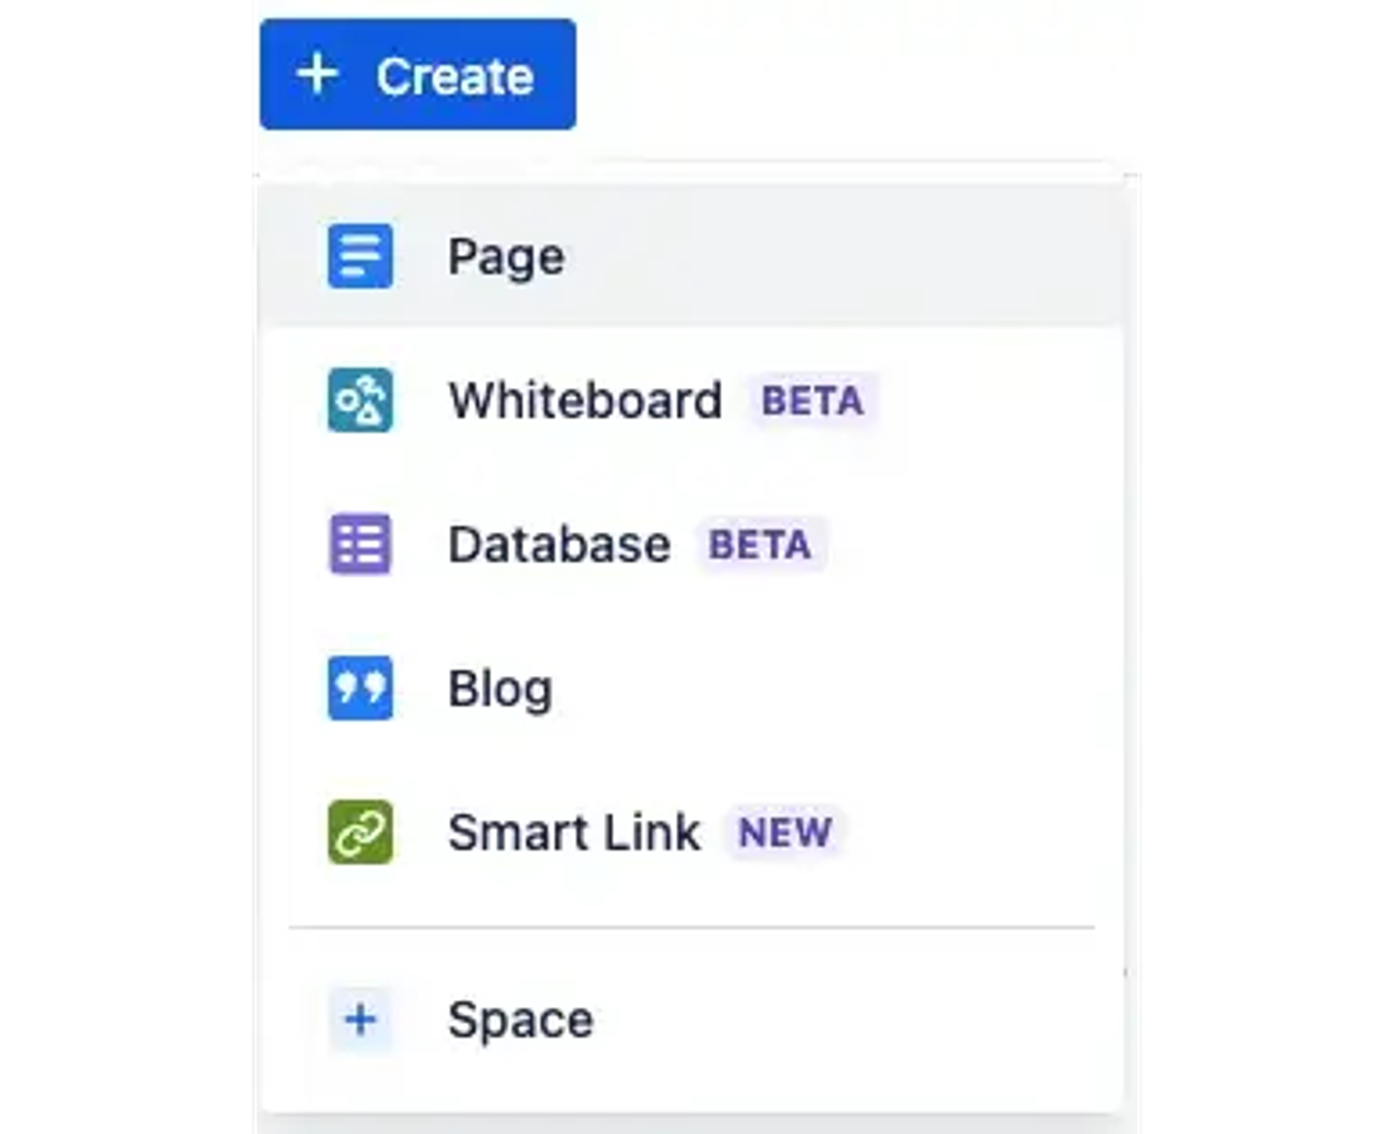 A screenshot showing the Create page option in Confluence